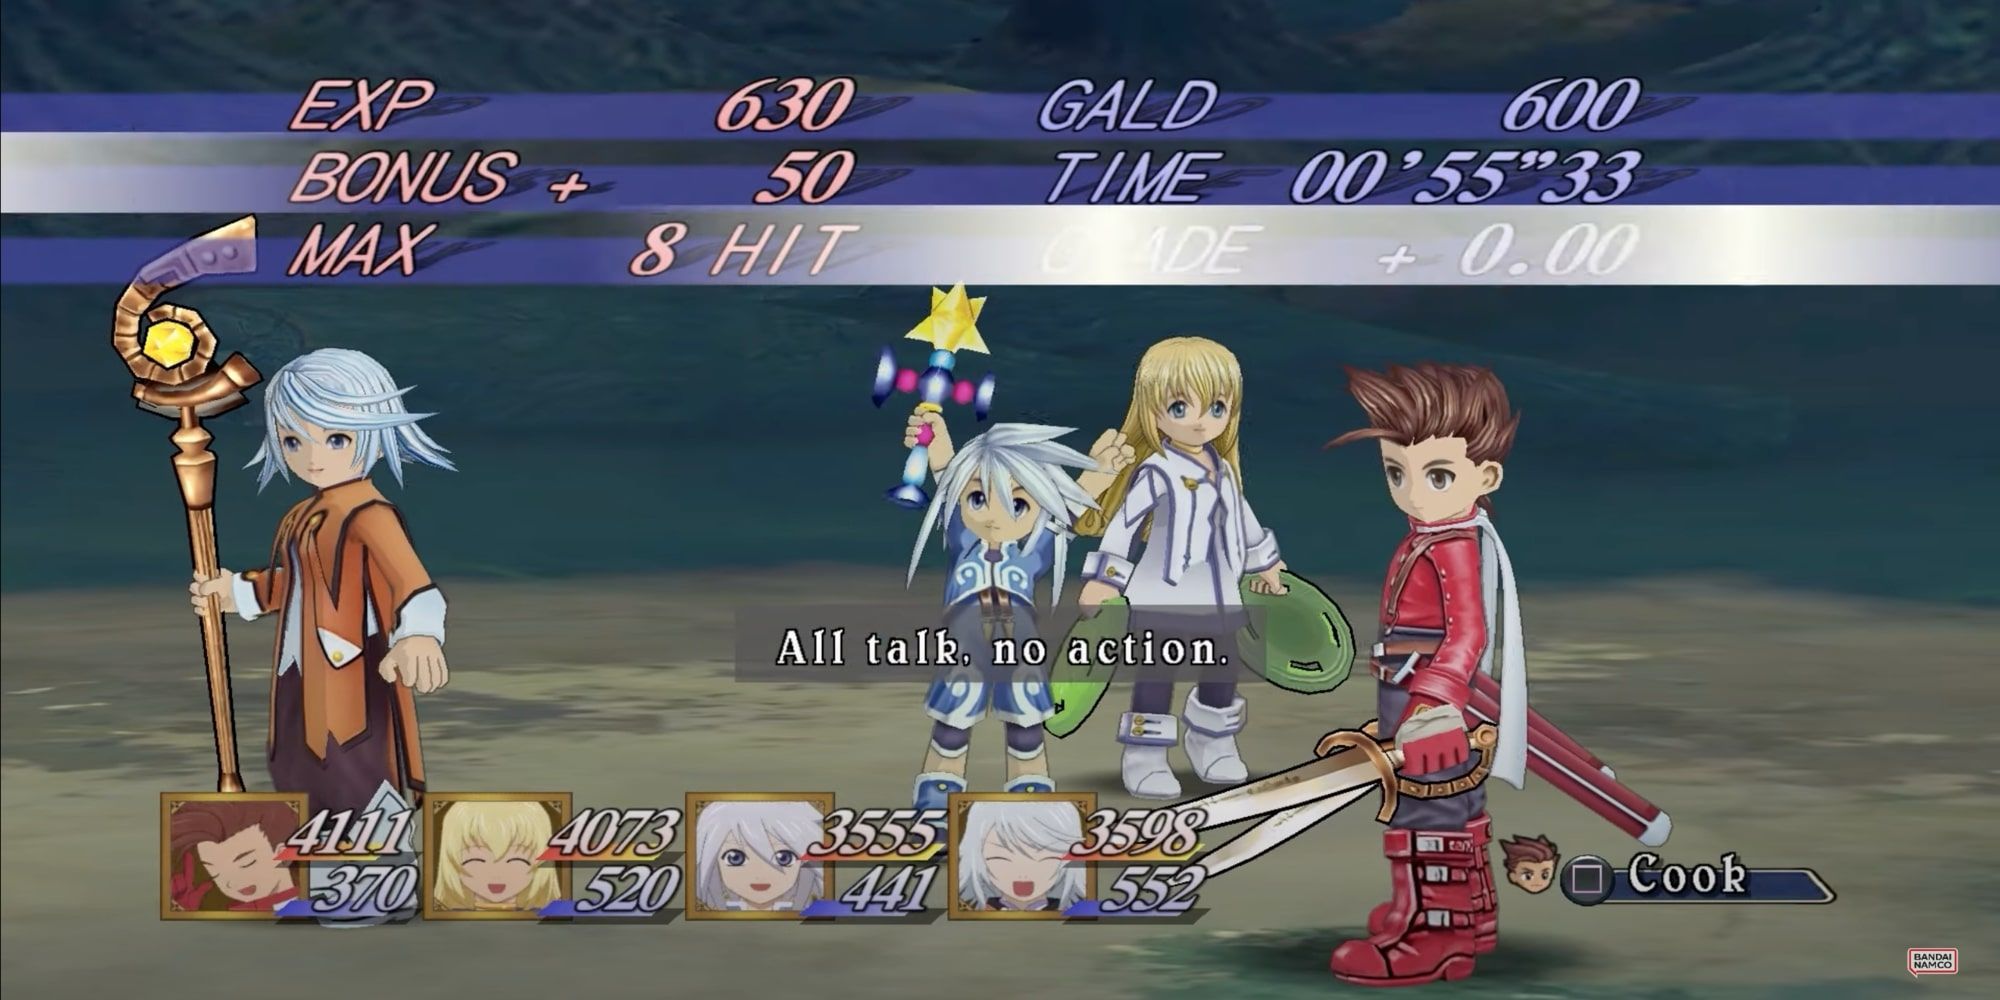 Charcters stand together in Tales of Symphonia Remastered gameplay trailer.